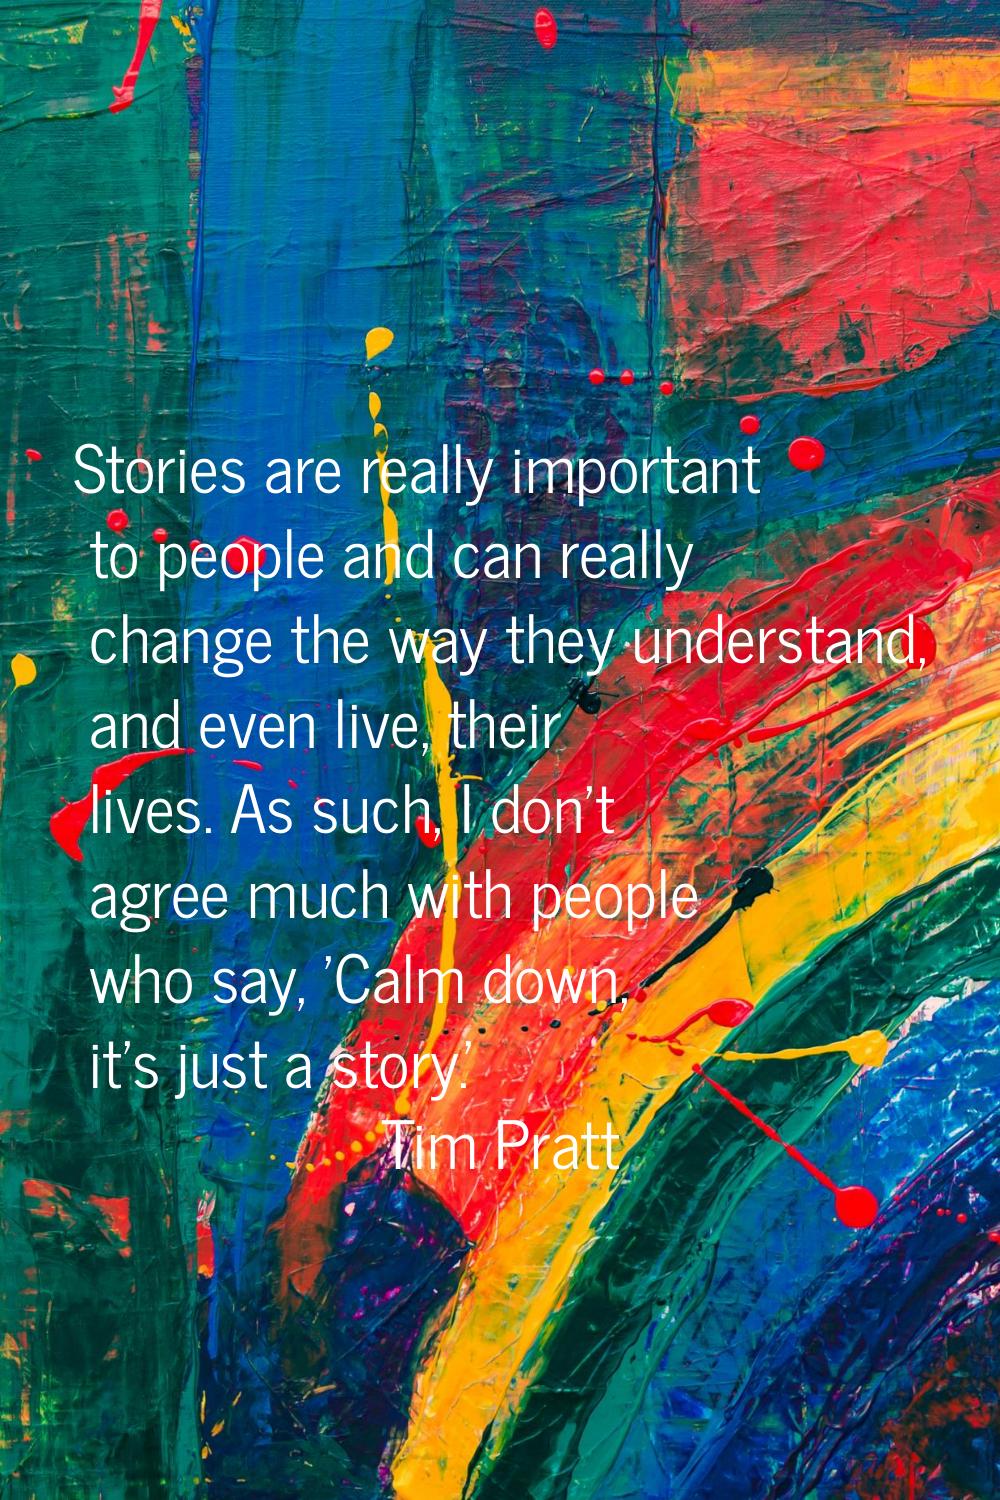 Stories are really important to people and can really change the way they understand, and even live